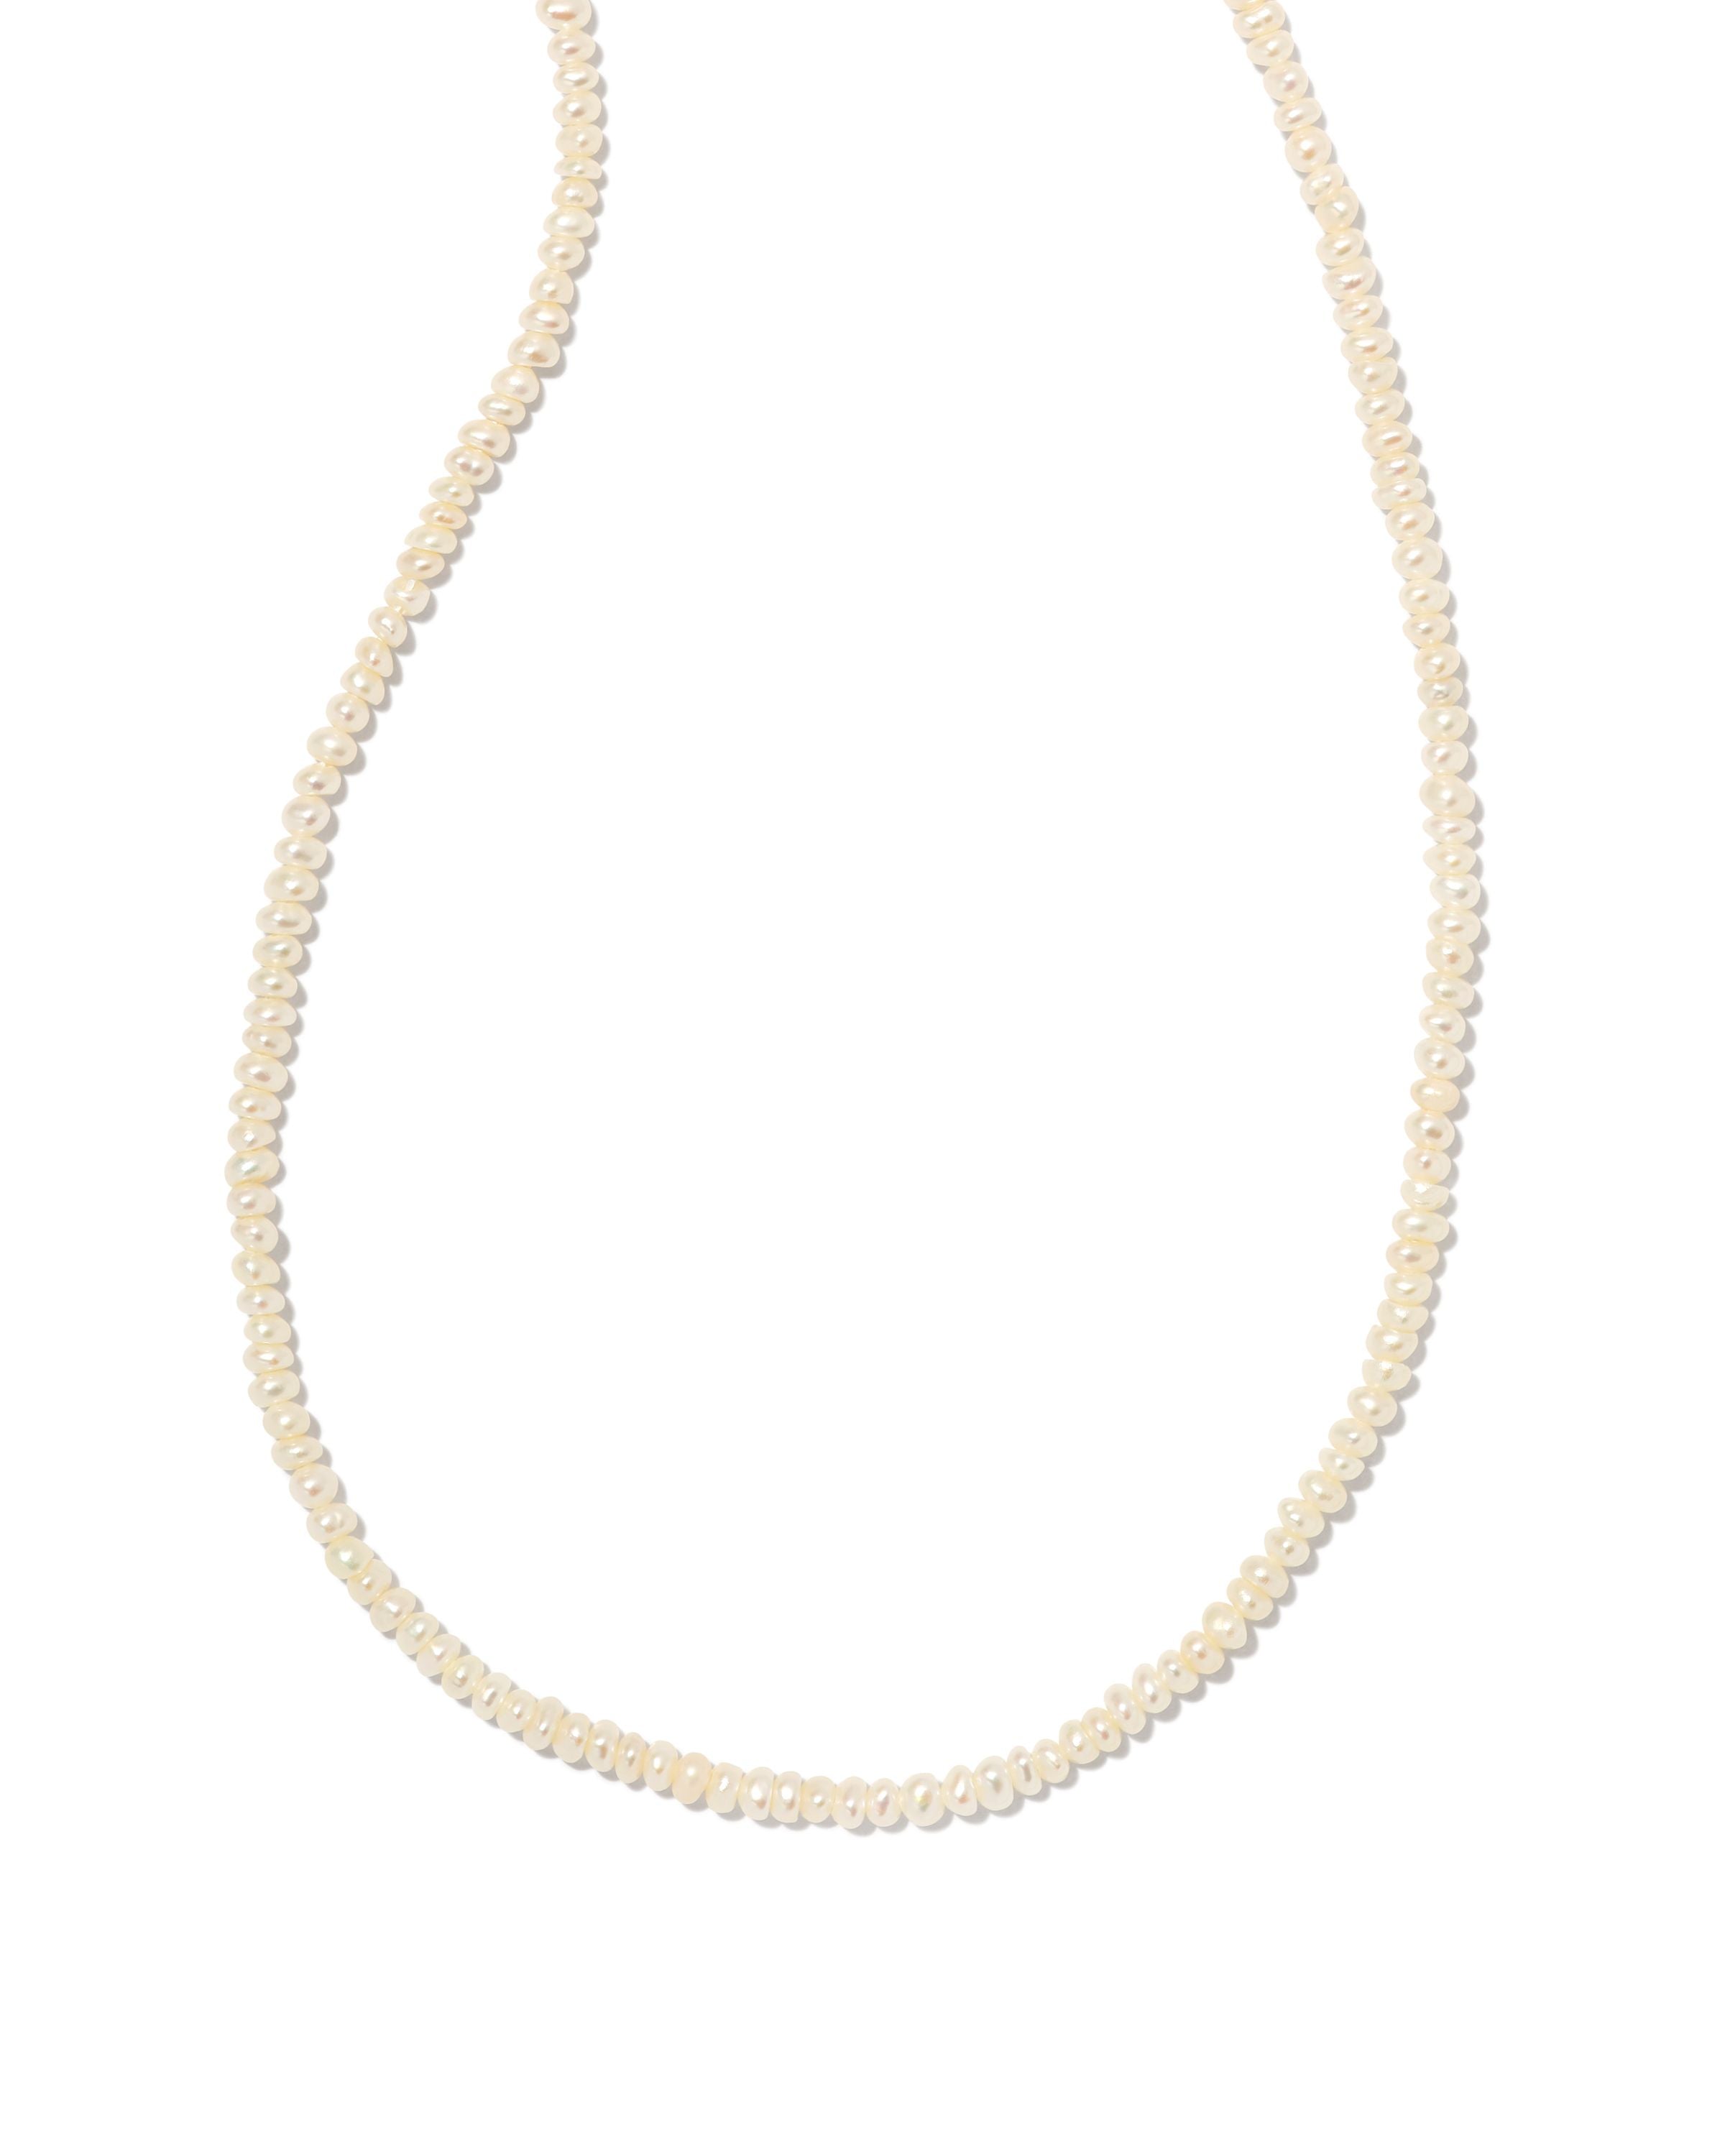 Lolo Strand Necklace in Gold White Pearl